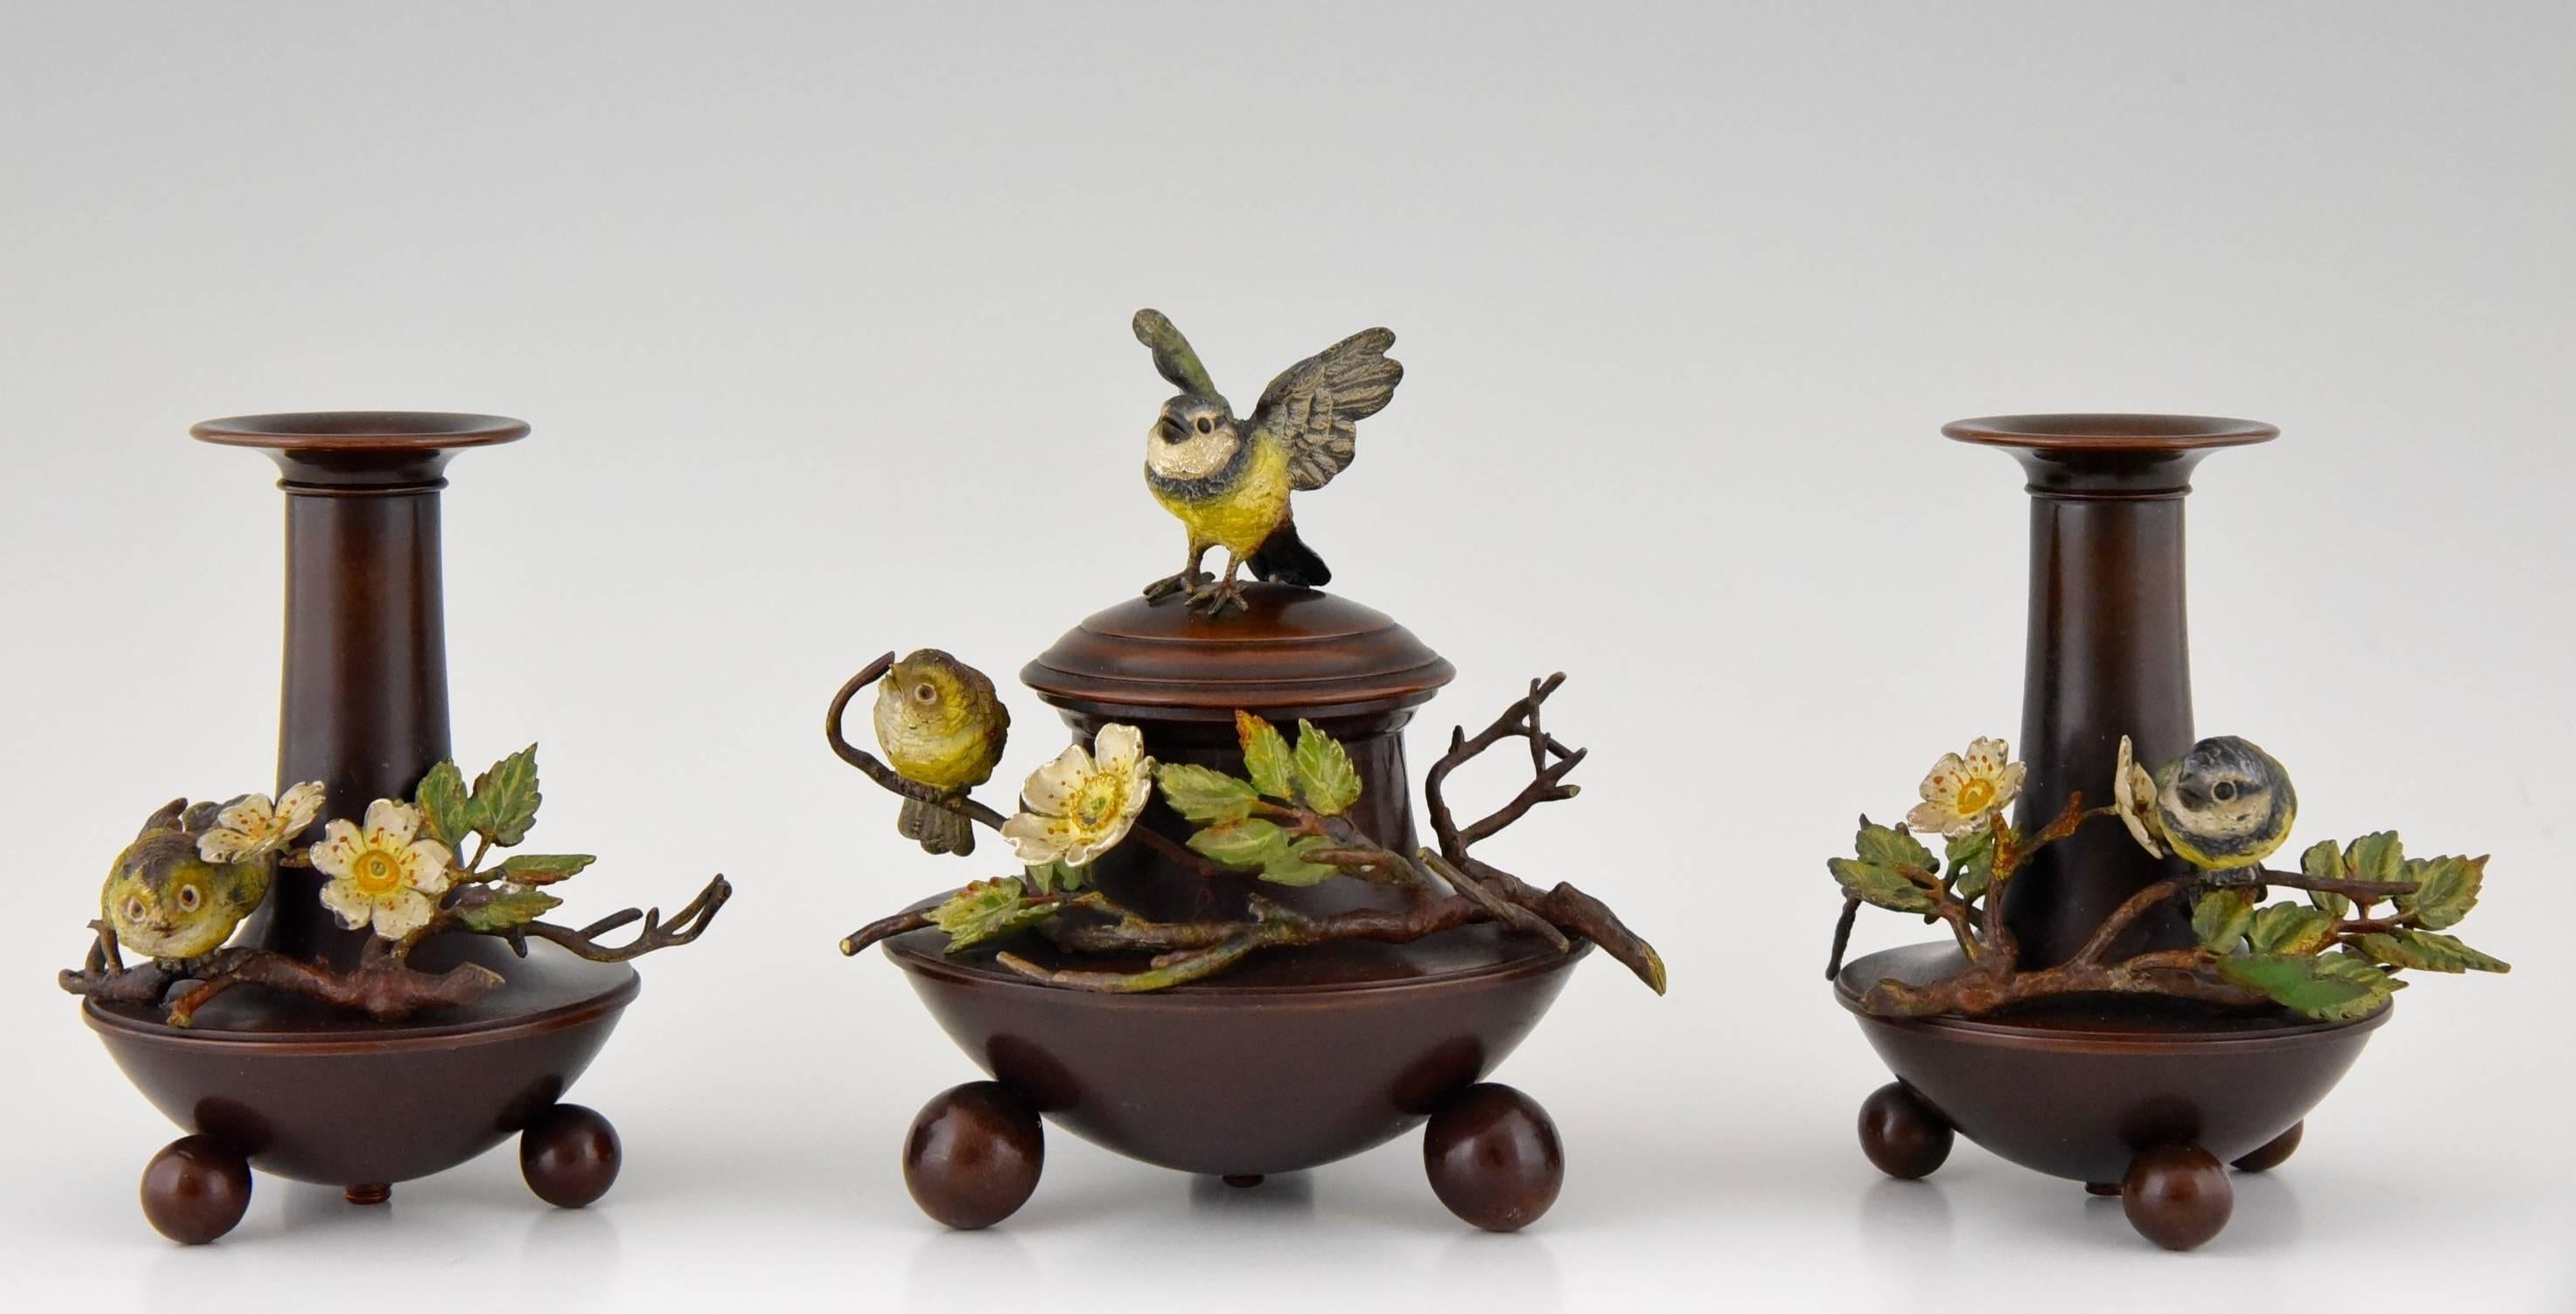 A Vienna bronze desk set, inkwell and two vases with birds.  
Very fine quality.  
Date:  Ca 1900	
		 
Material:  Cold painted bronze birds.  Bronze with brown patina.
Origin:  Austria. 			
Condition: Very good original condition.

Size